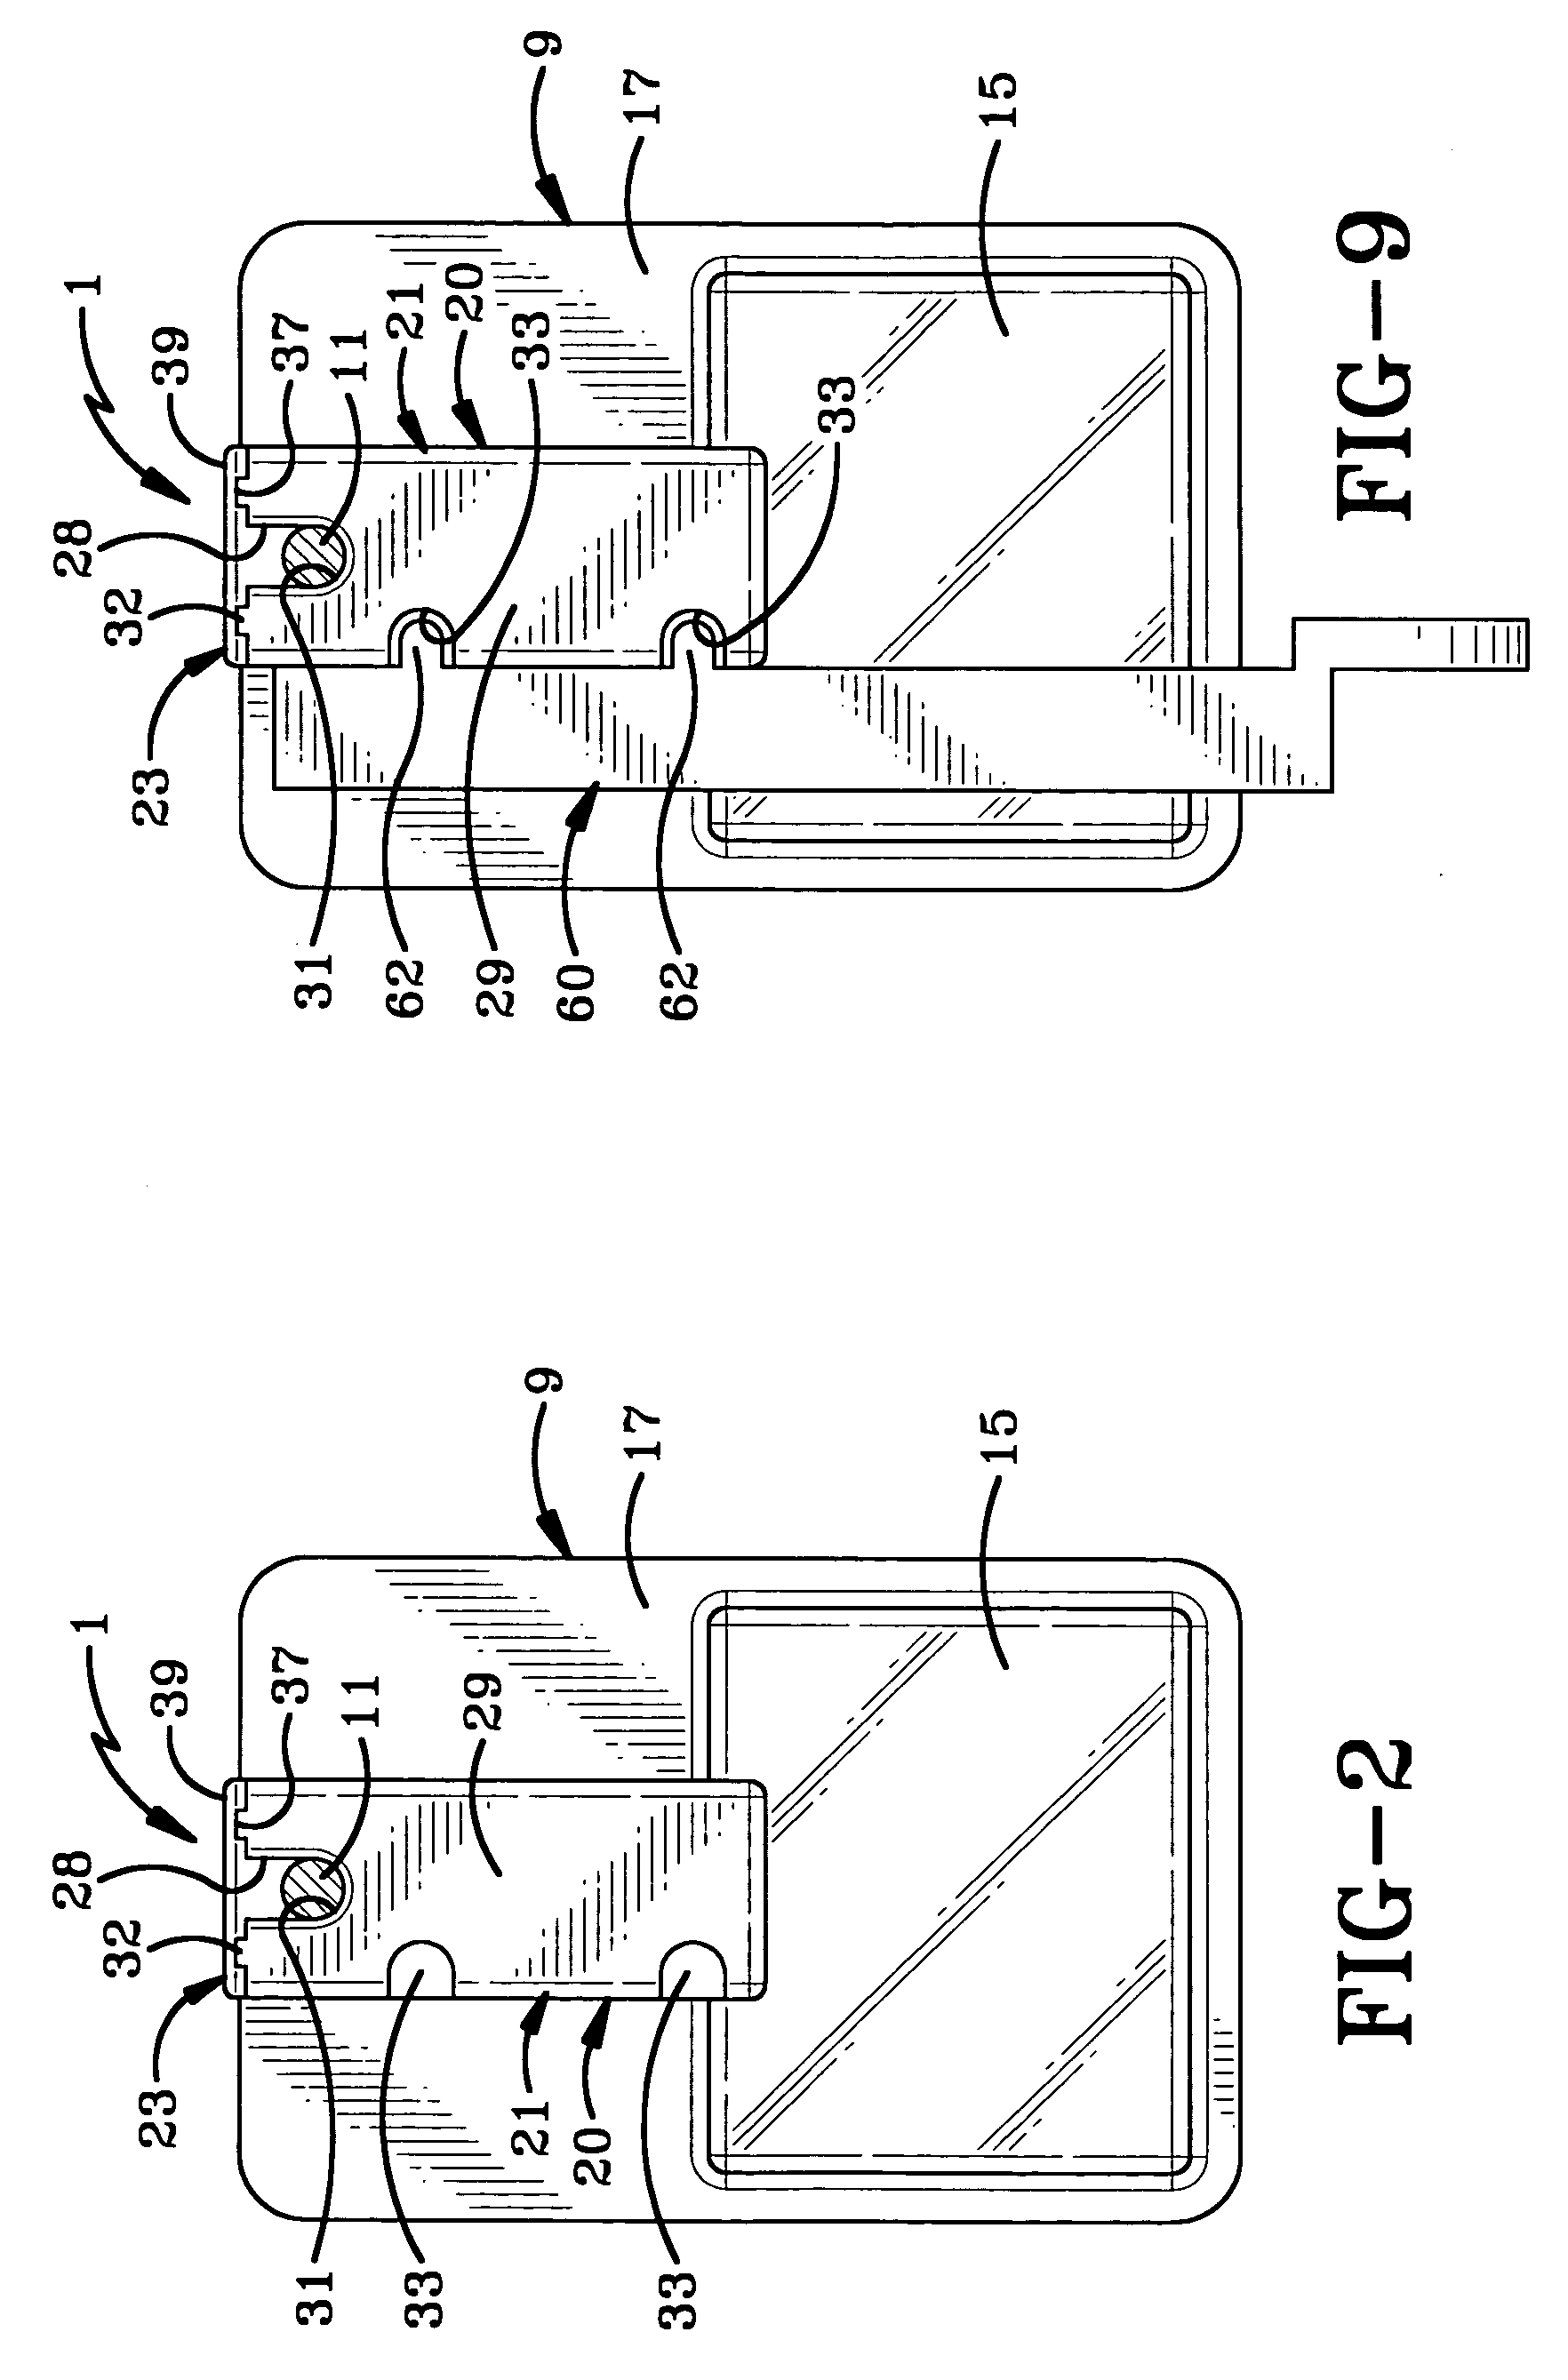 Display rod security device